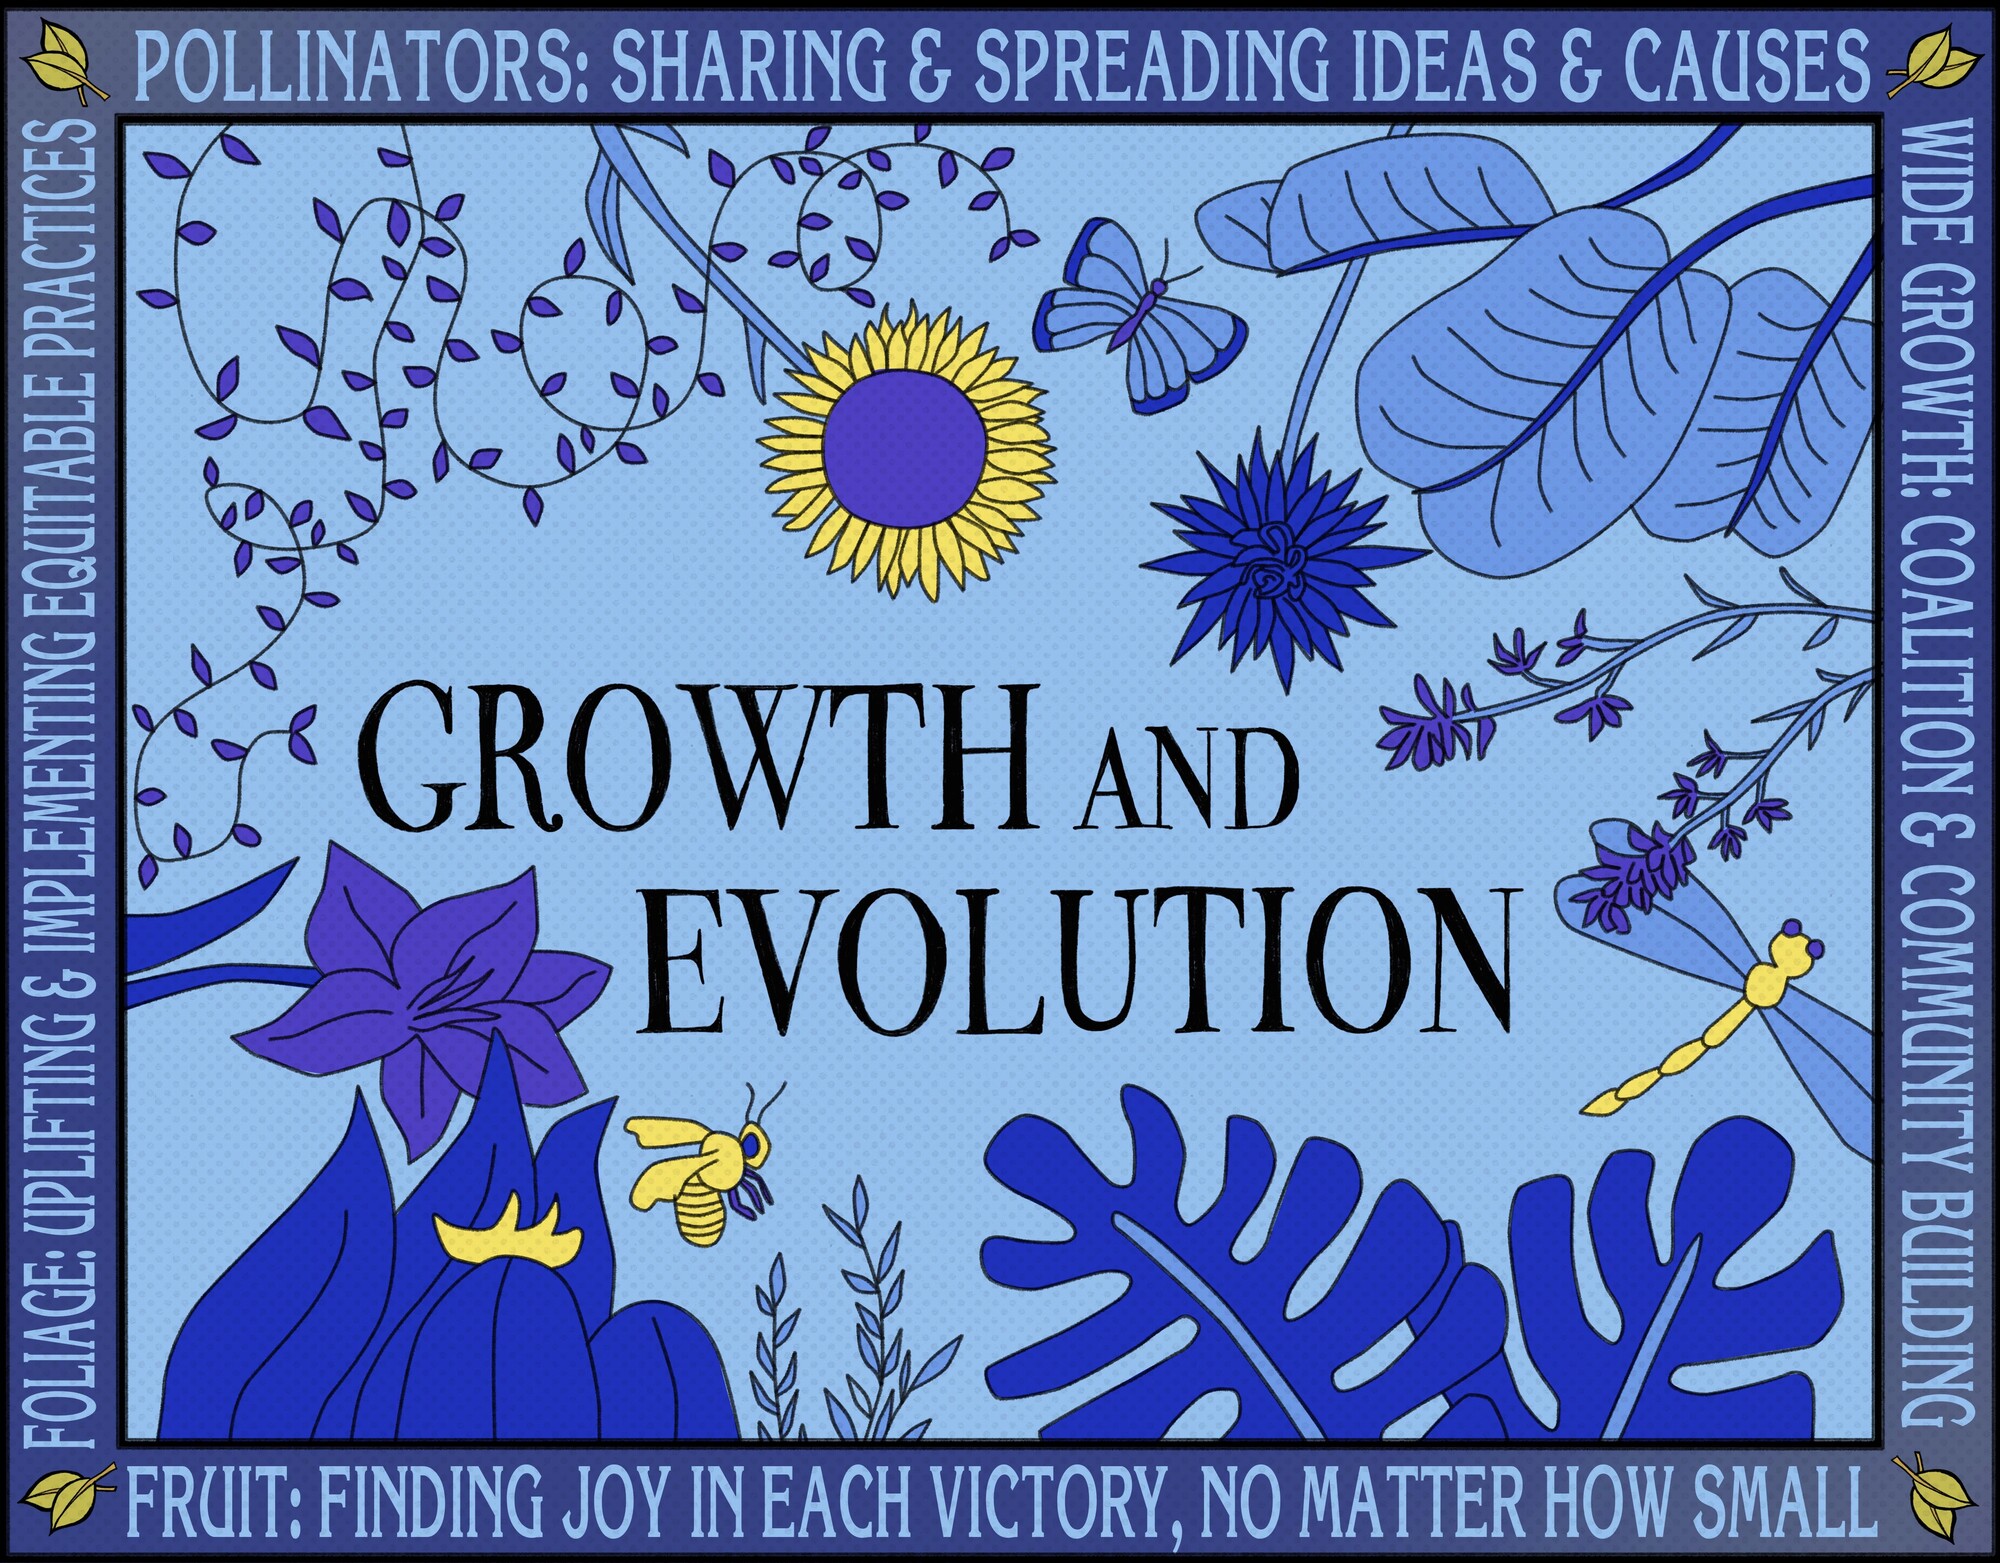 A blue image with the words "Growth and Evolution" against a floral background and the words "pollinators," "wide growth," "fruit," and "foliage" in the margins.